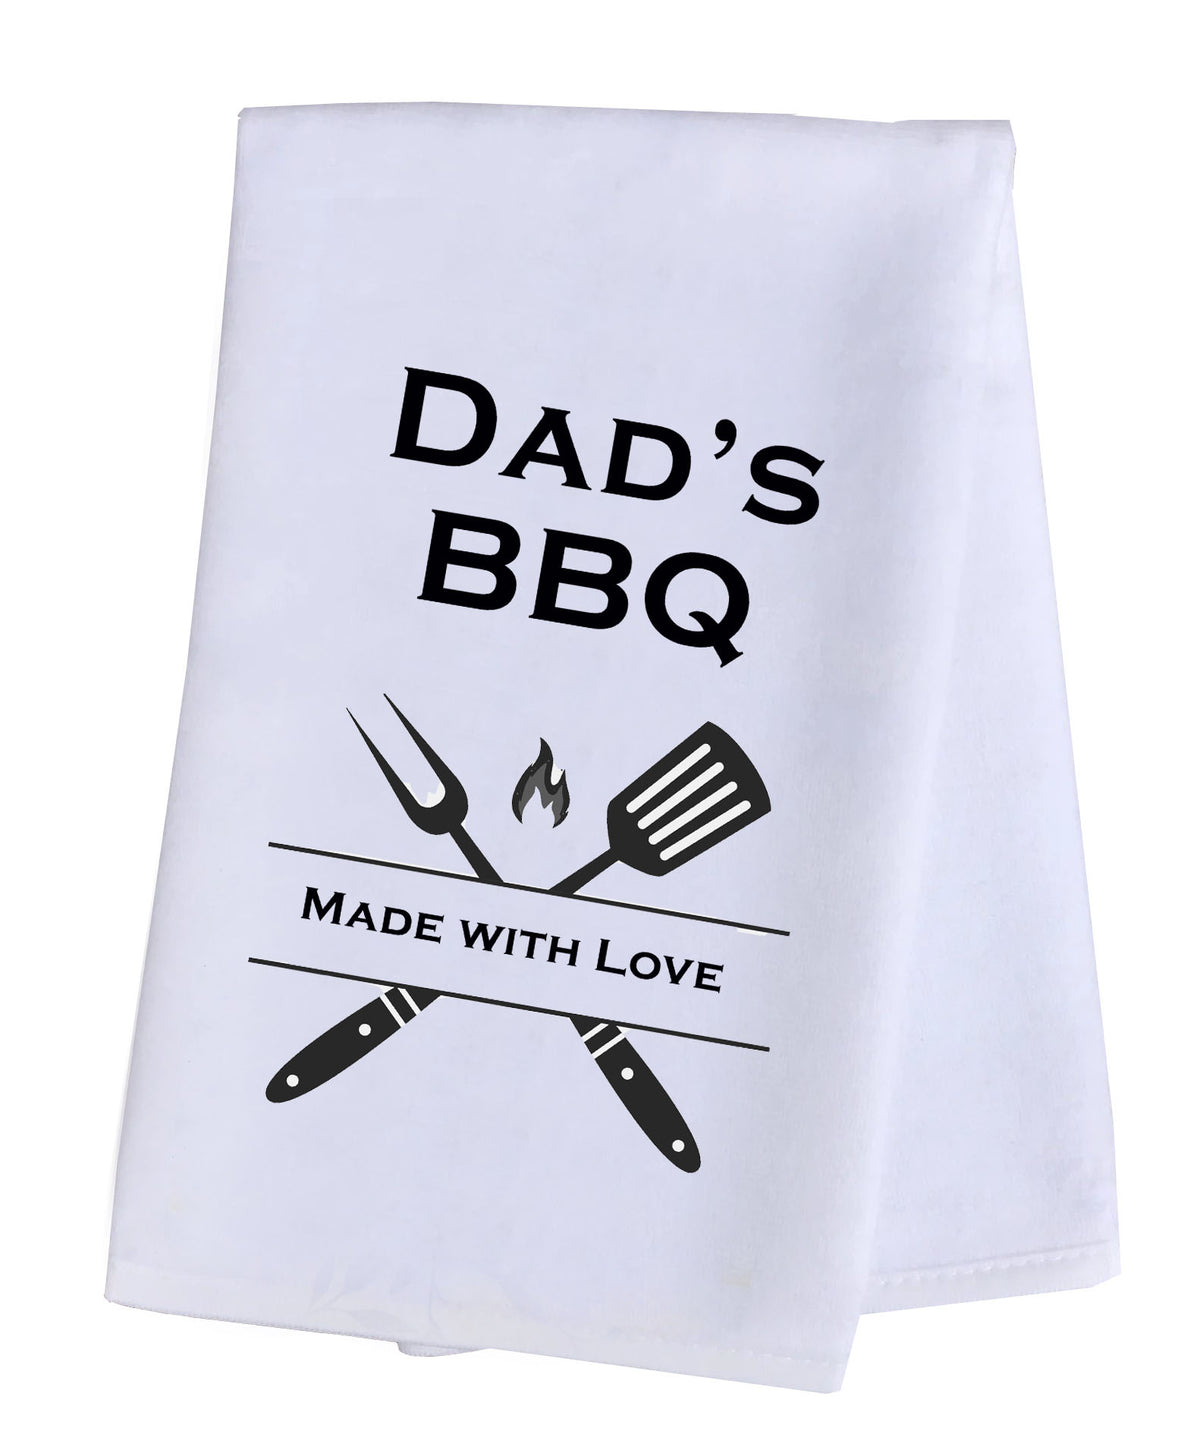 Hand Towel Plush - Dad's BBQ Made with Love